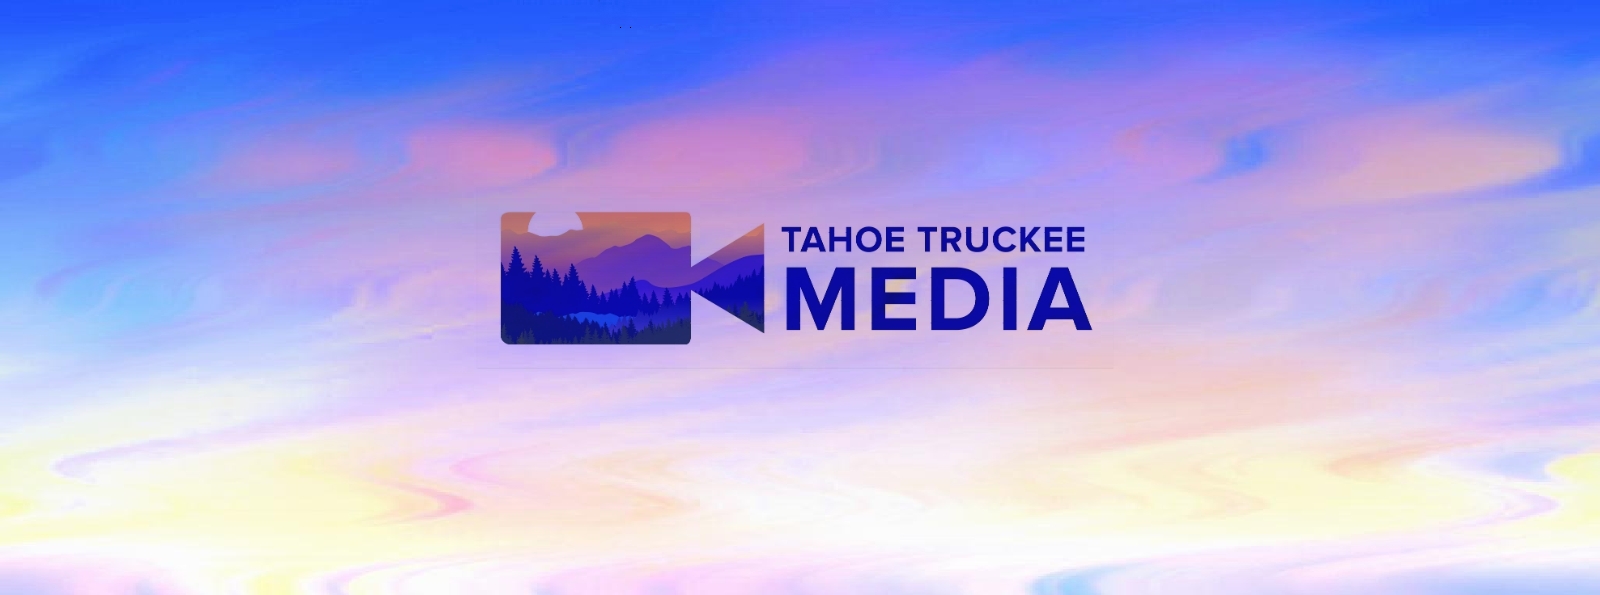 Tahoe Truckee Media Expands to HD Channels